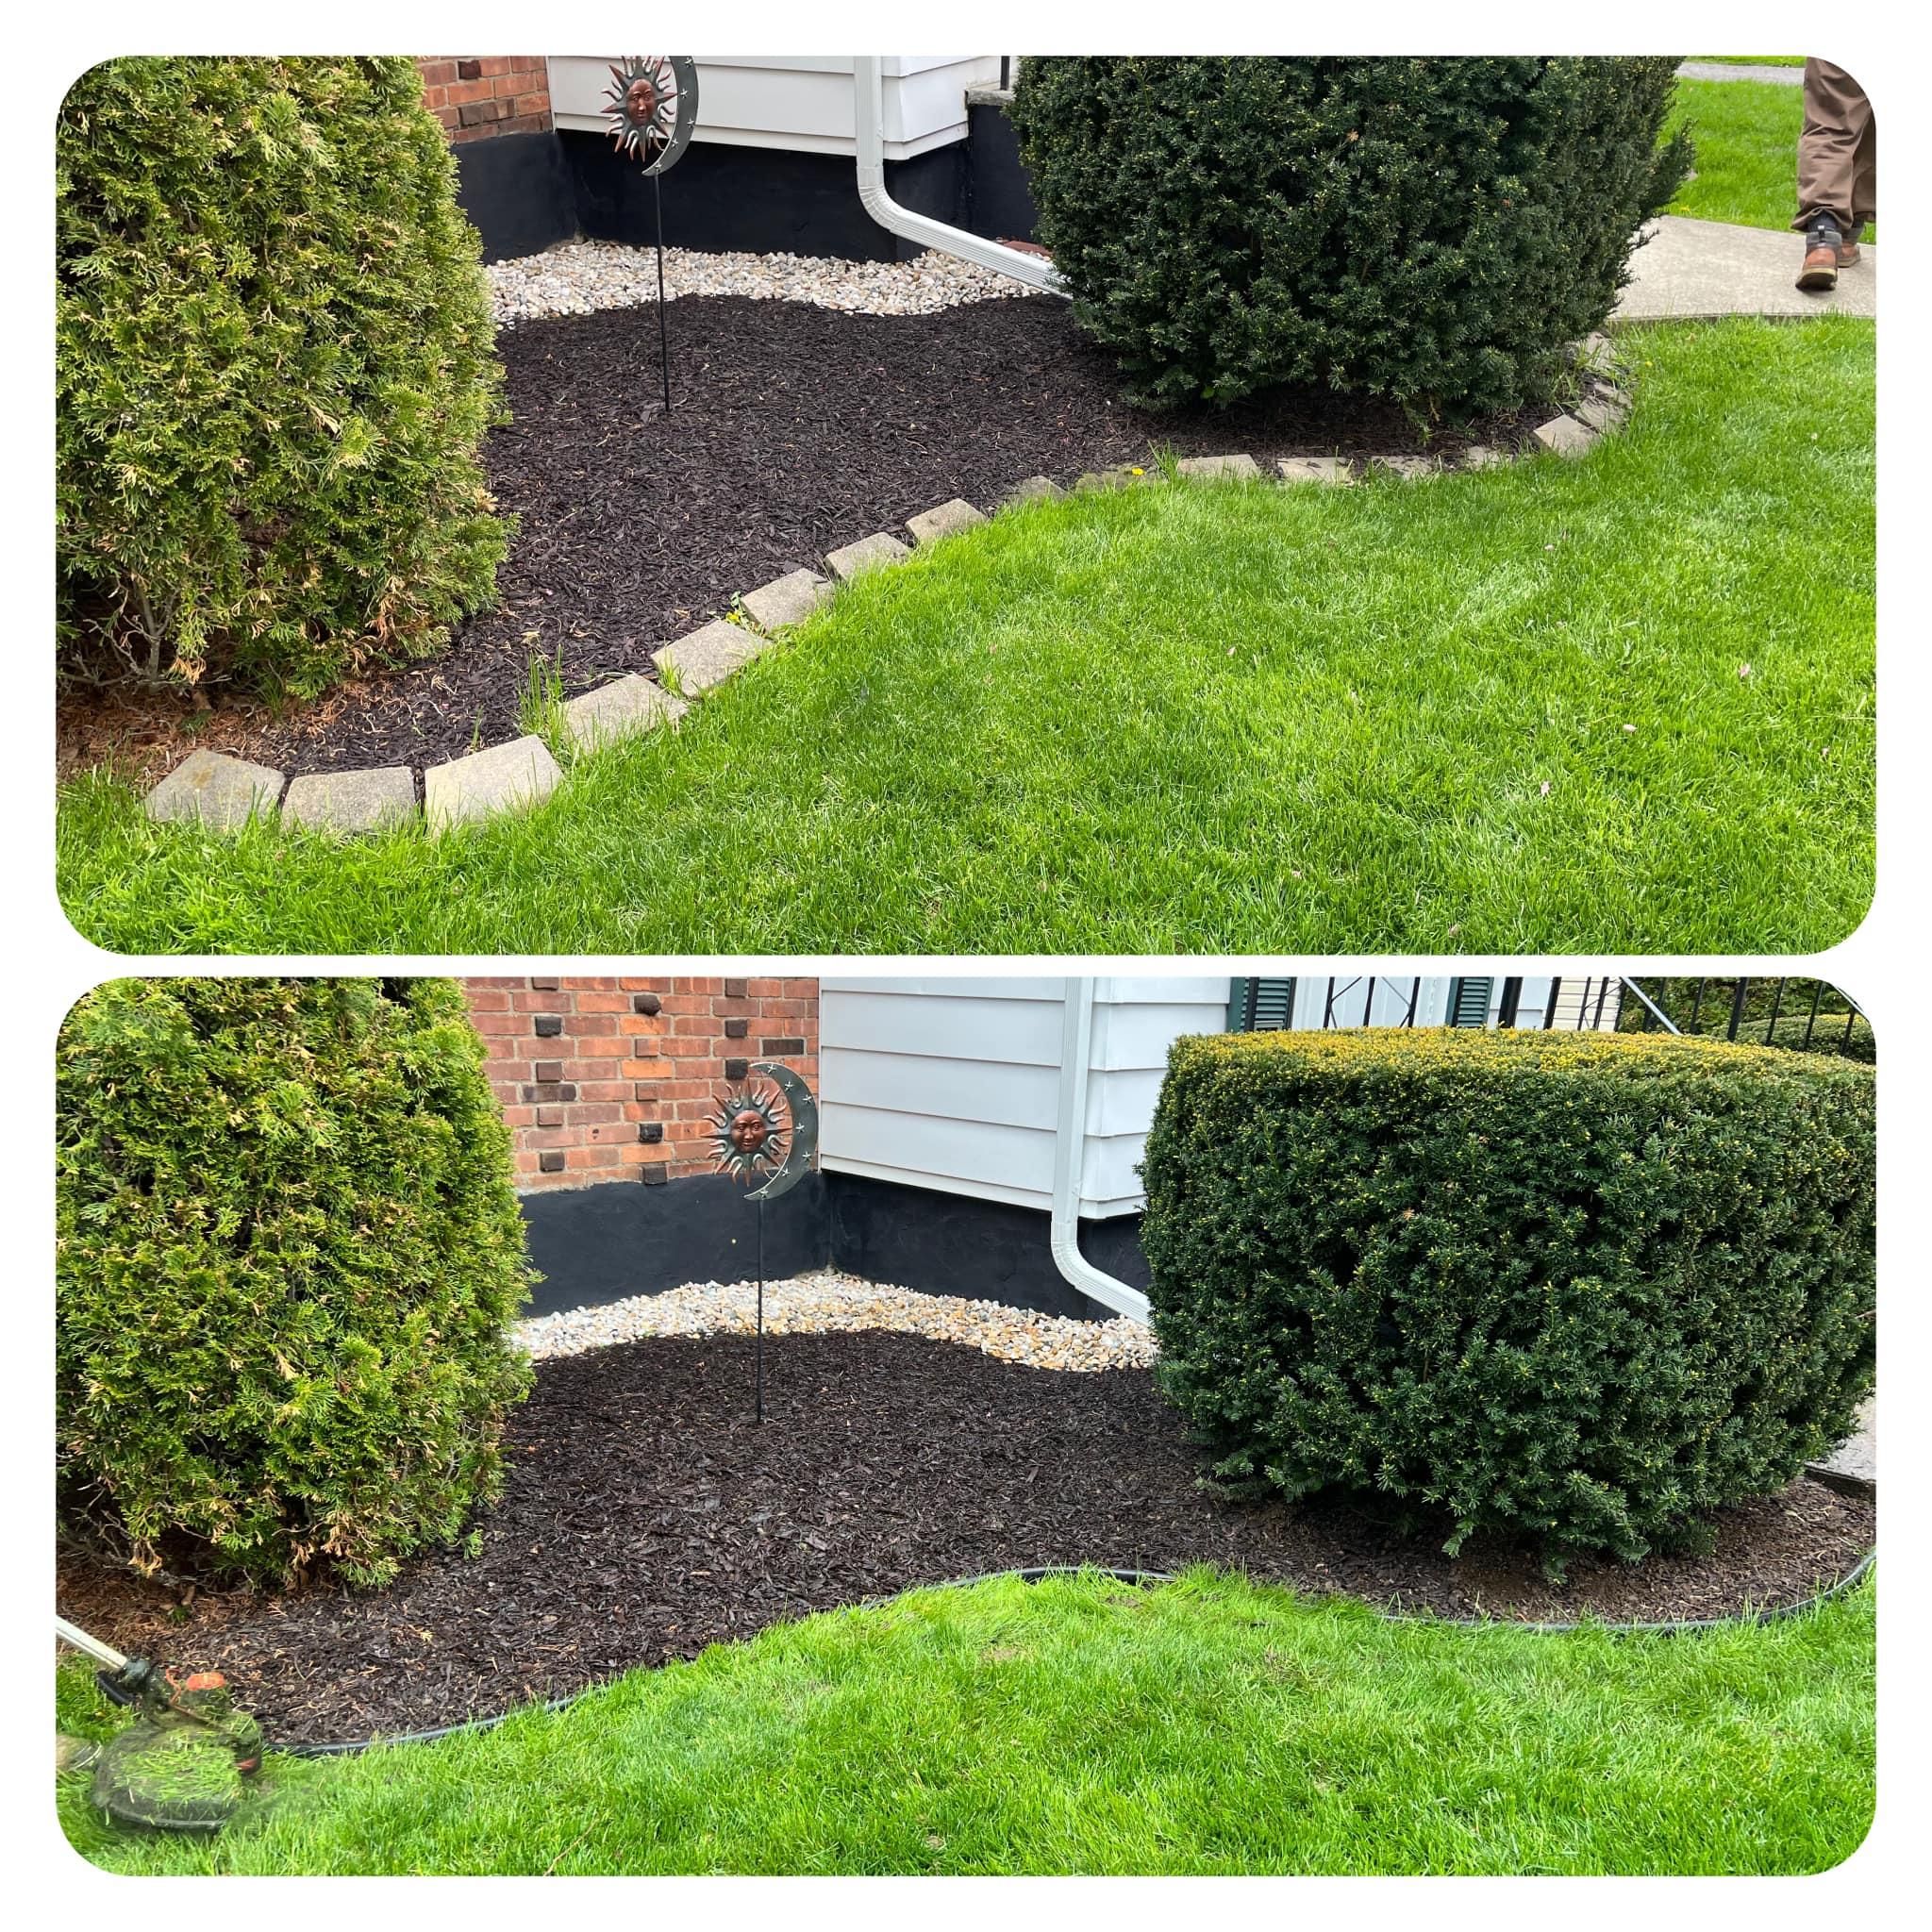  for Bumblebee Lawn Care LLC in Albany, New York